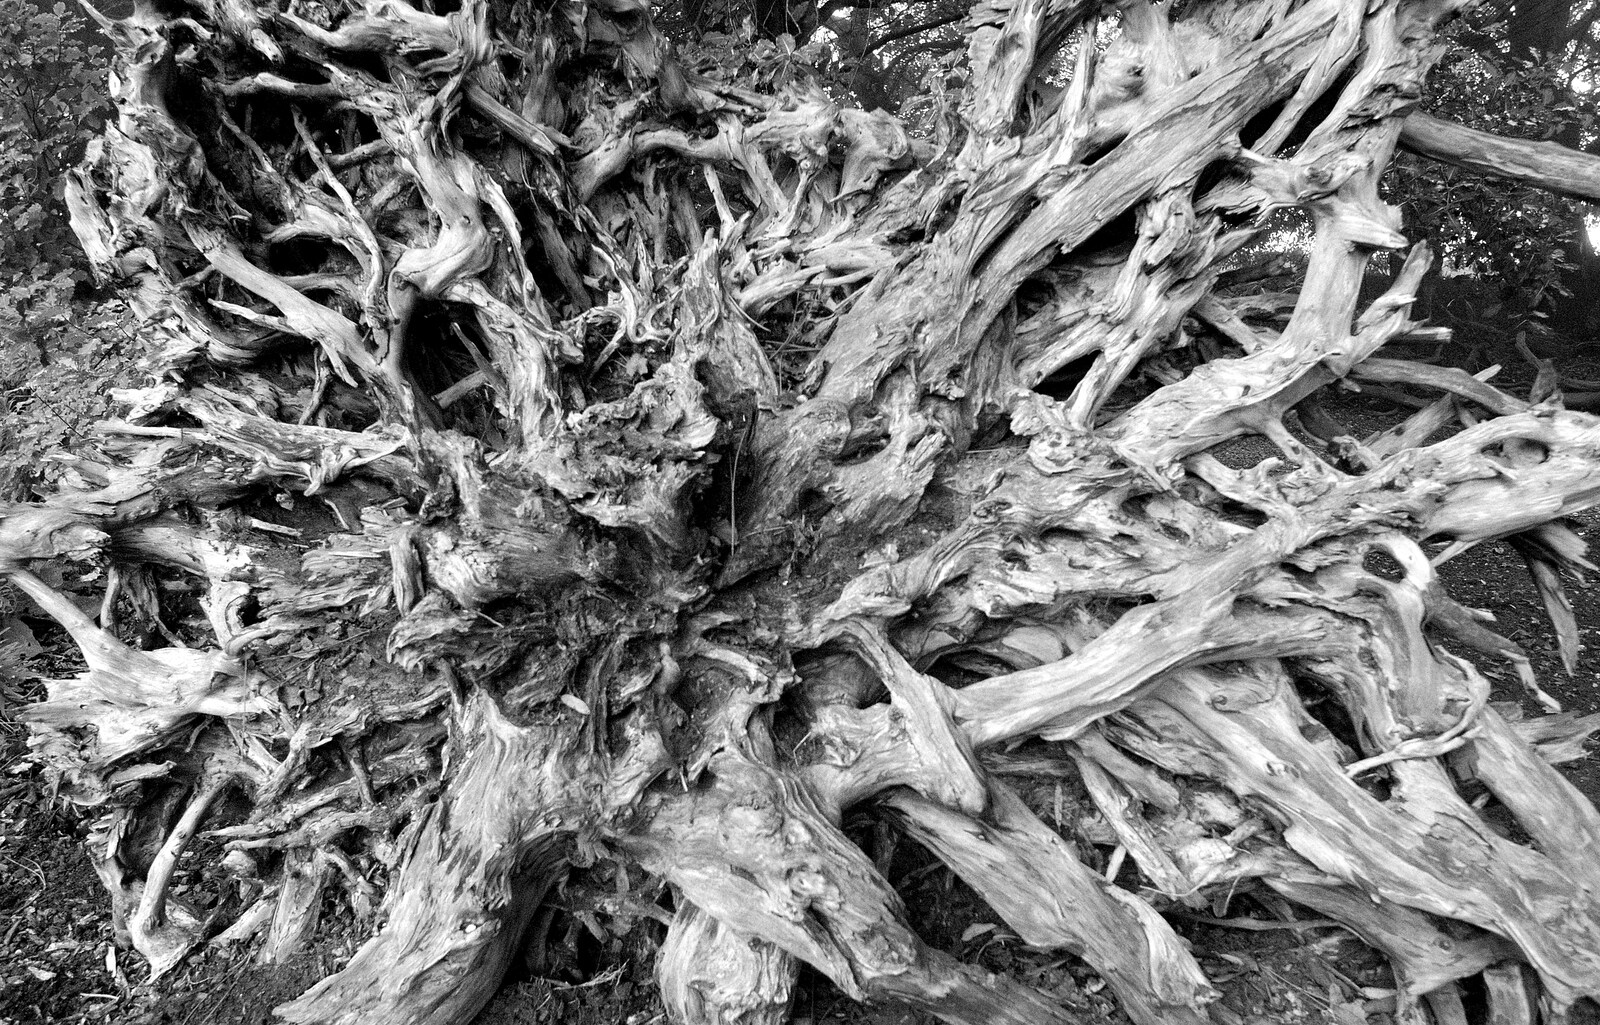 An amazing tree root, exposed in the Stumpery from A Trip to Ickworth House, Horringer, Suffolk - 30th December 2016